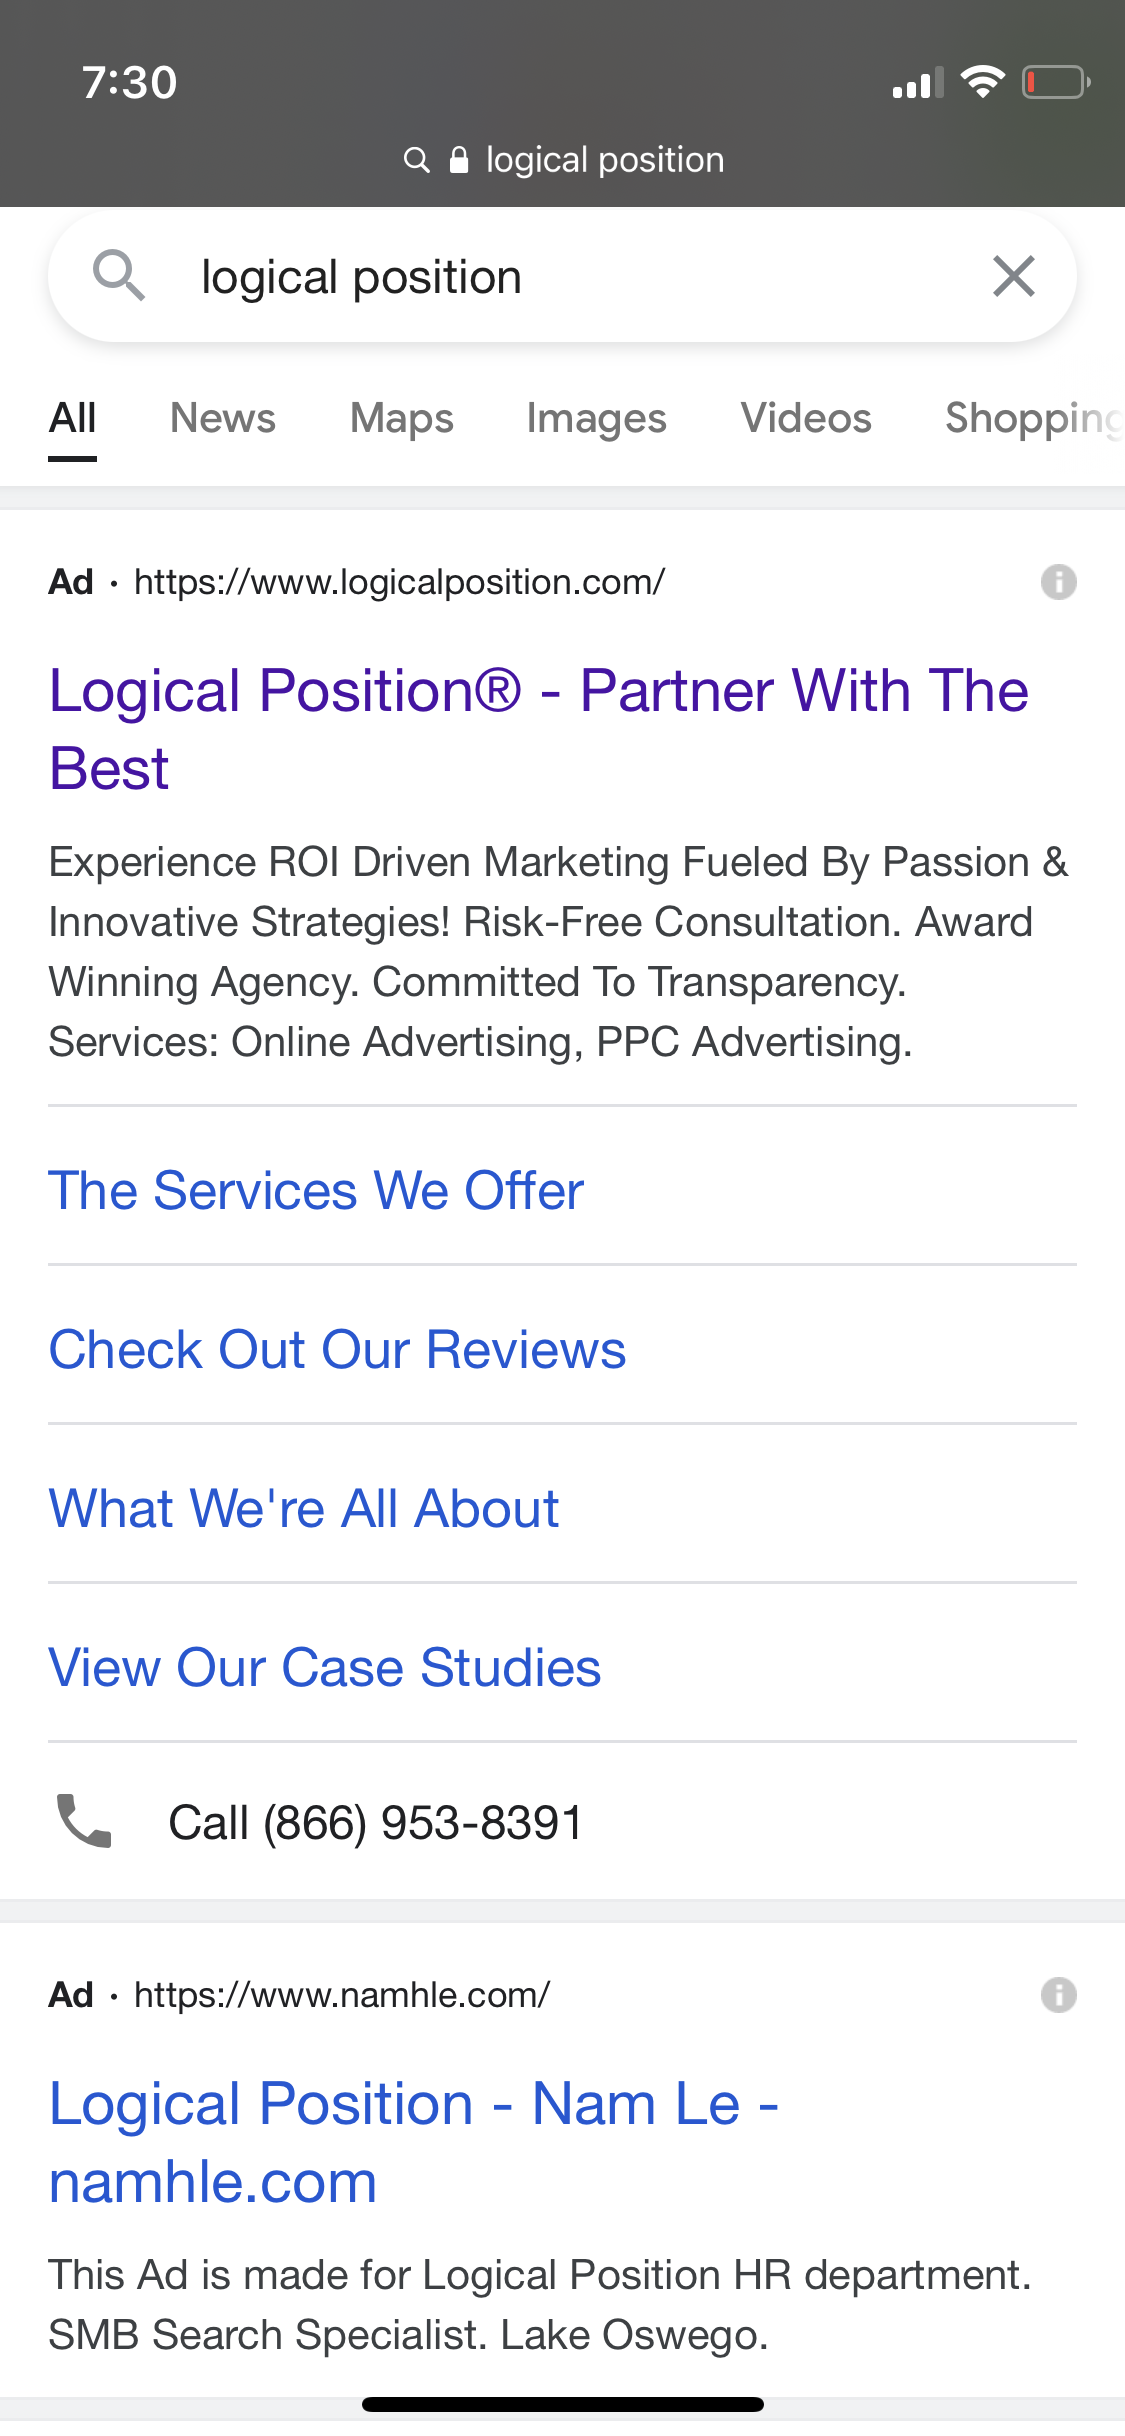 Logical Position - Partner With The